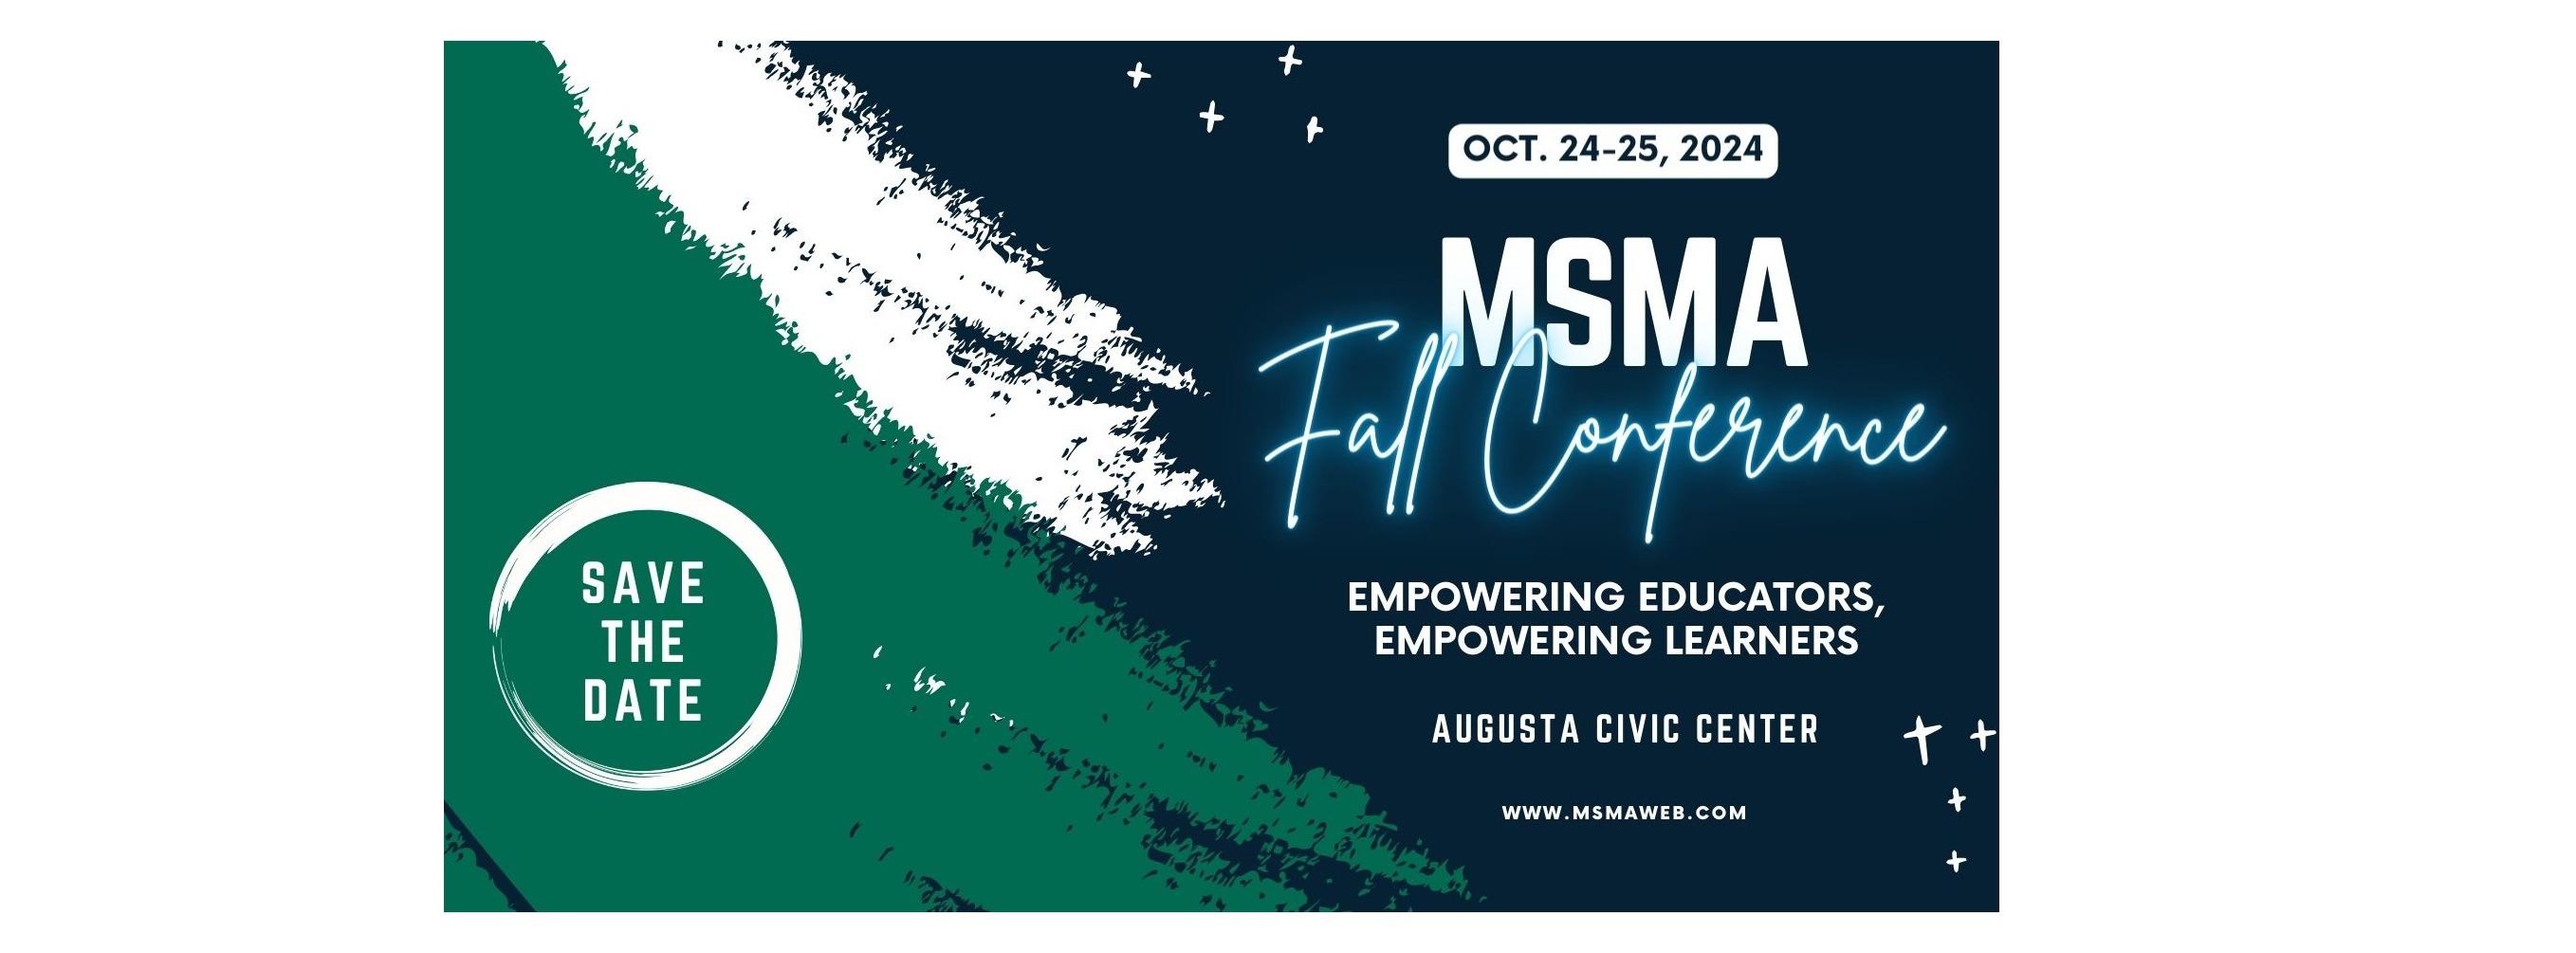 Save the Date - MSMA Fall Conference